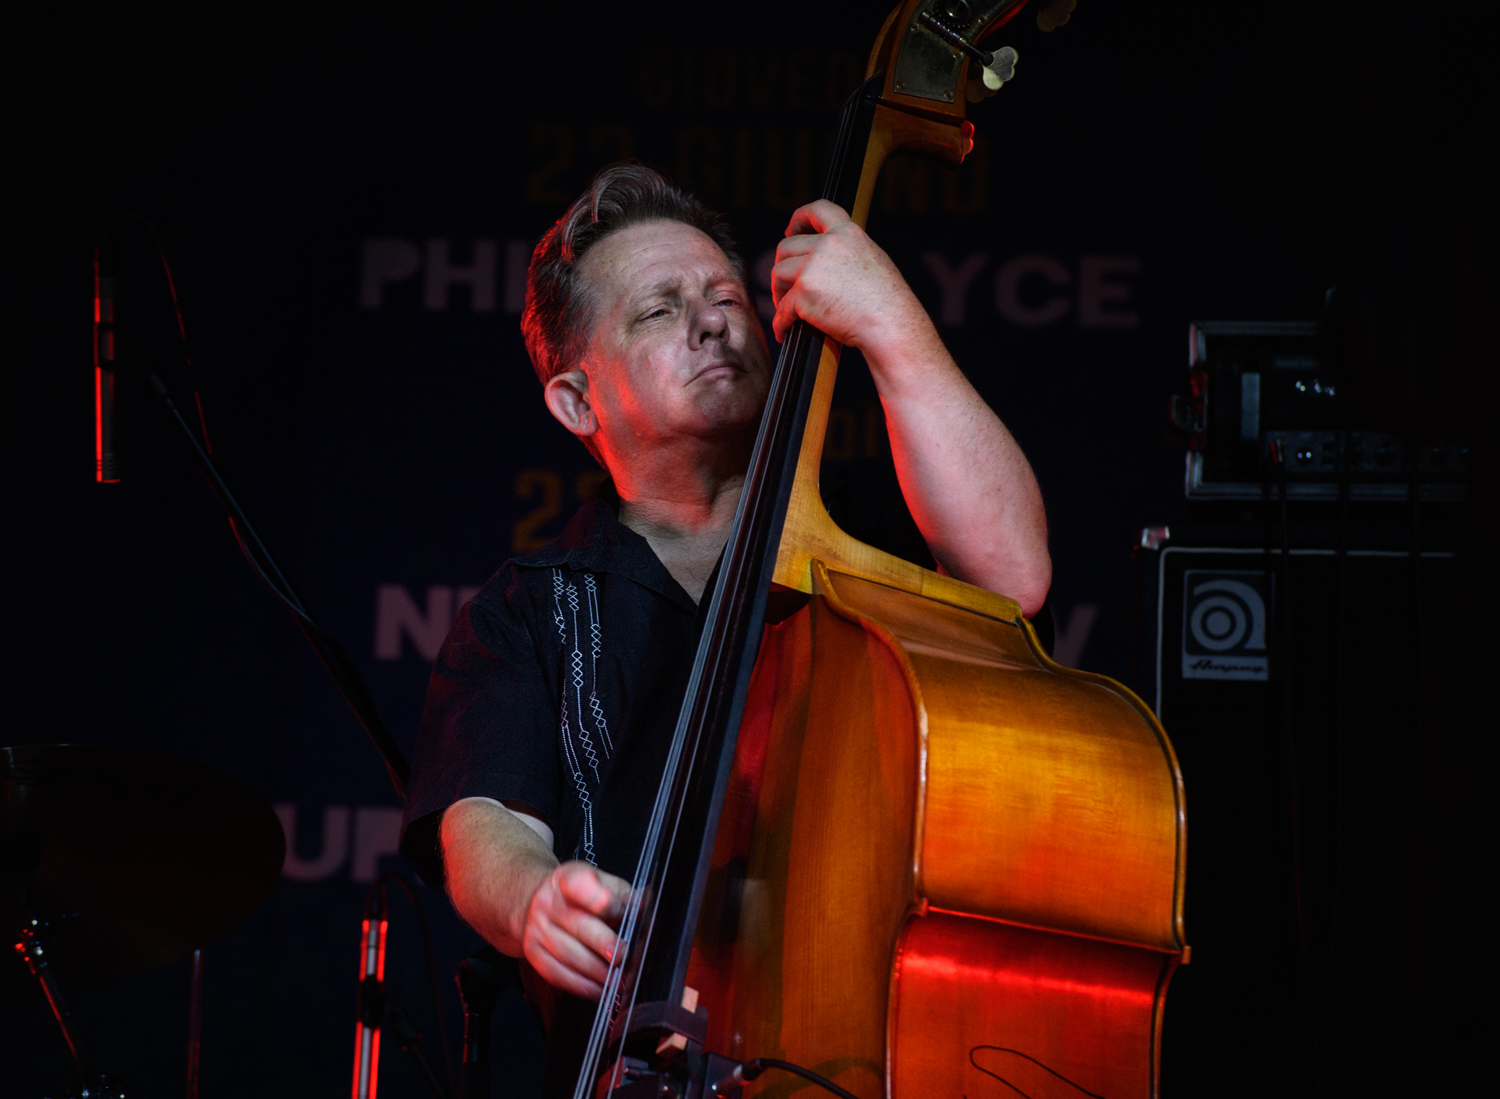 The double bass player...